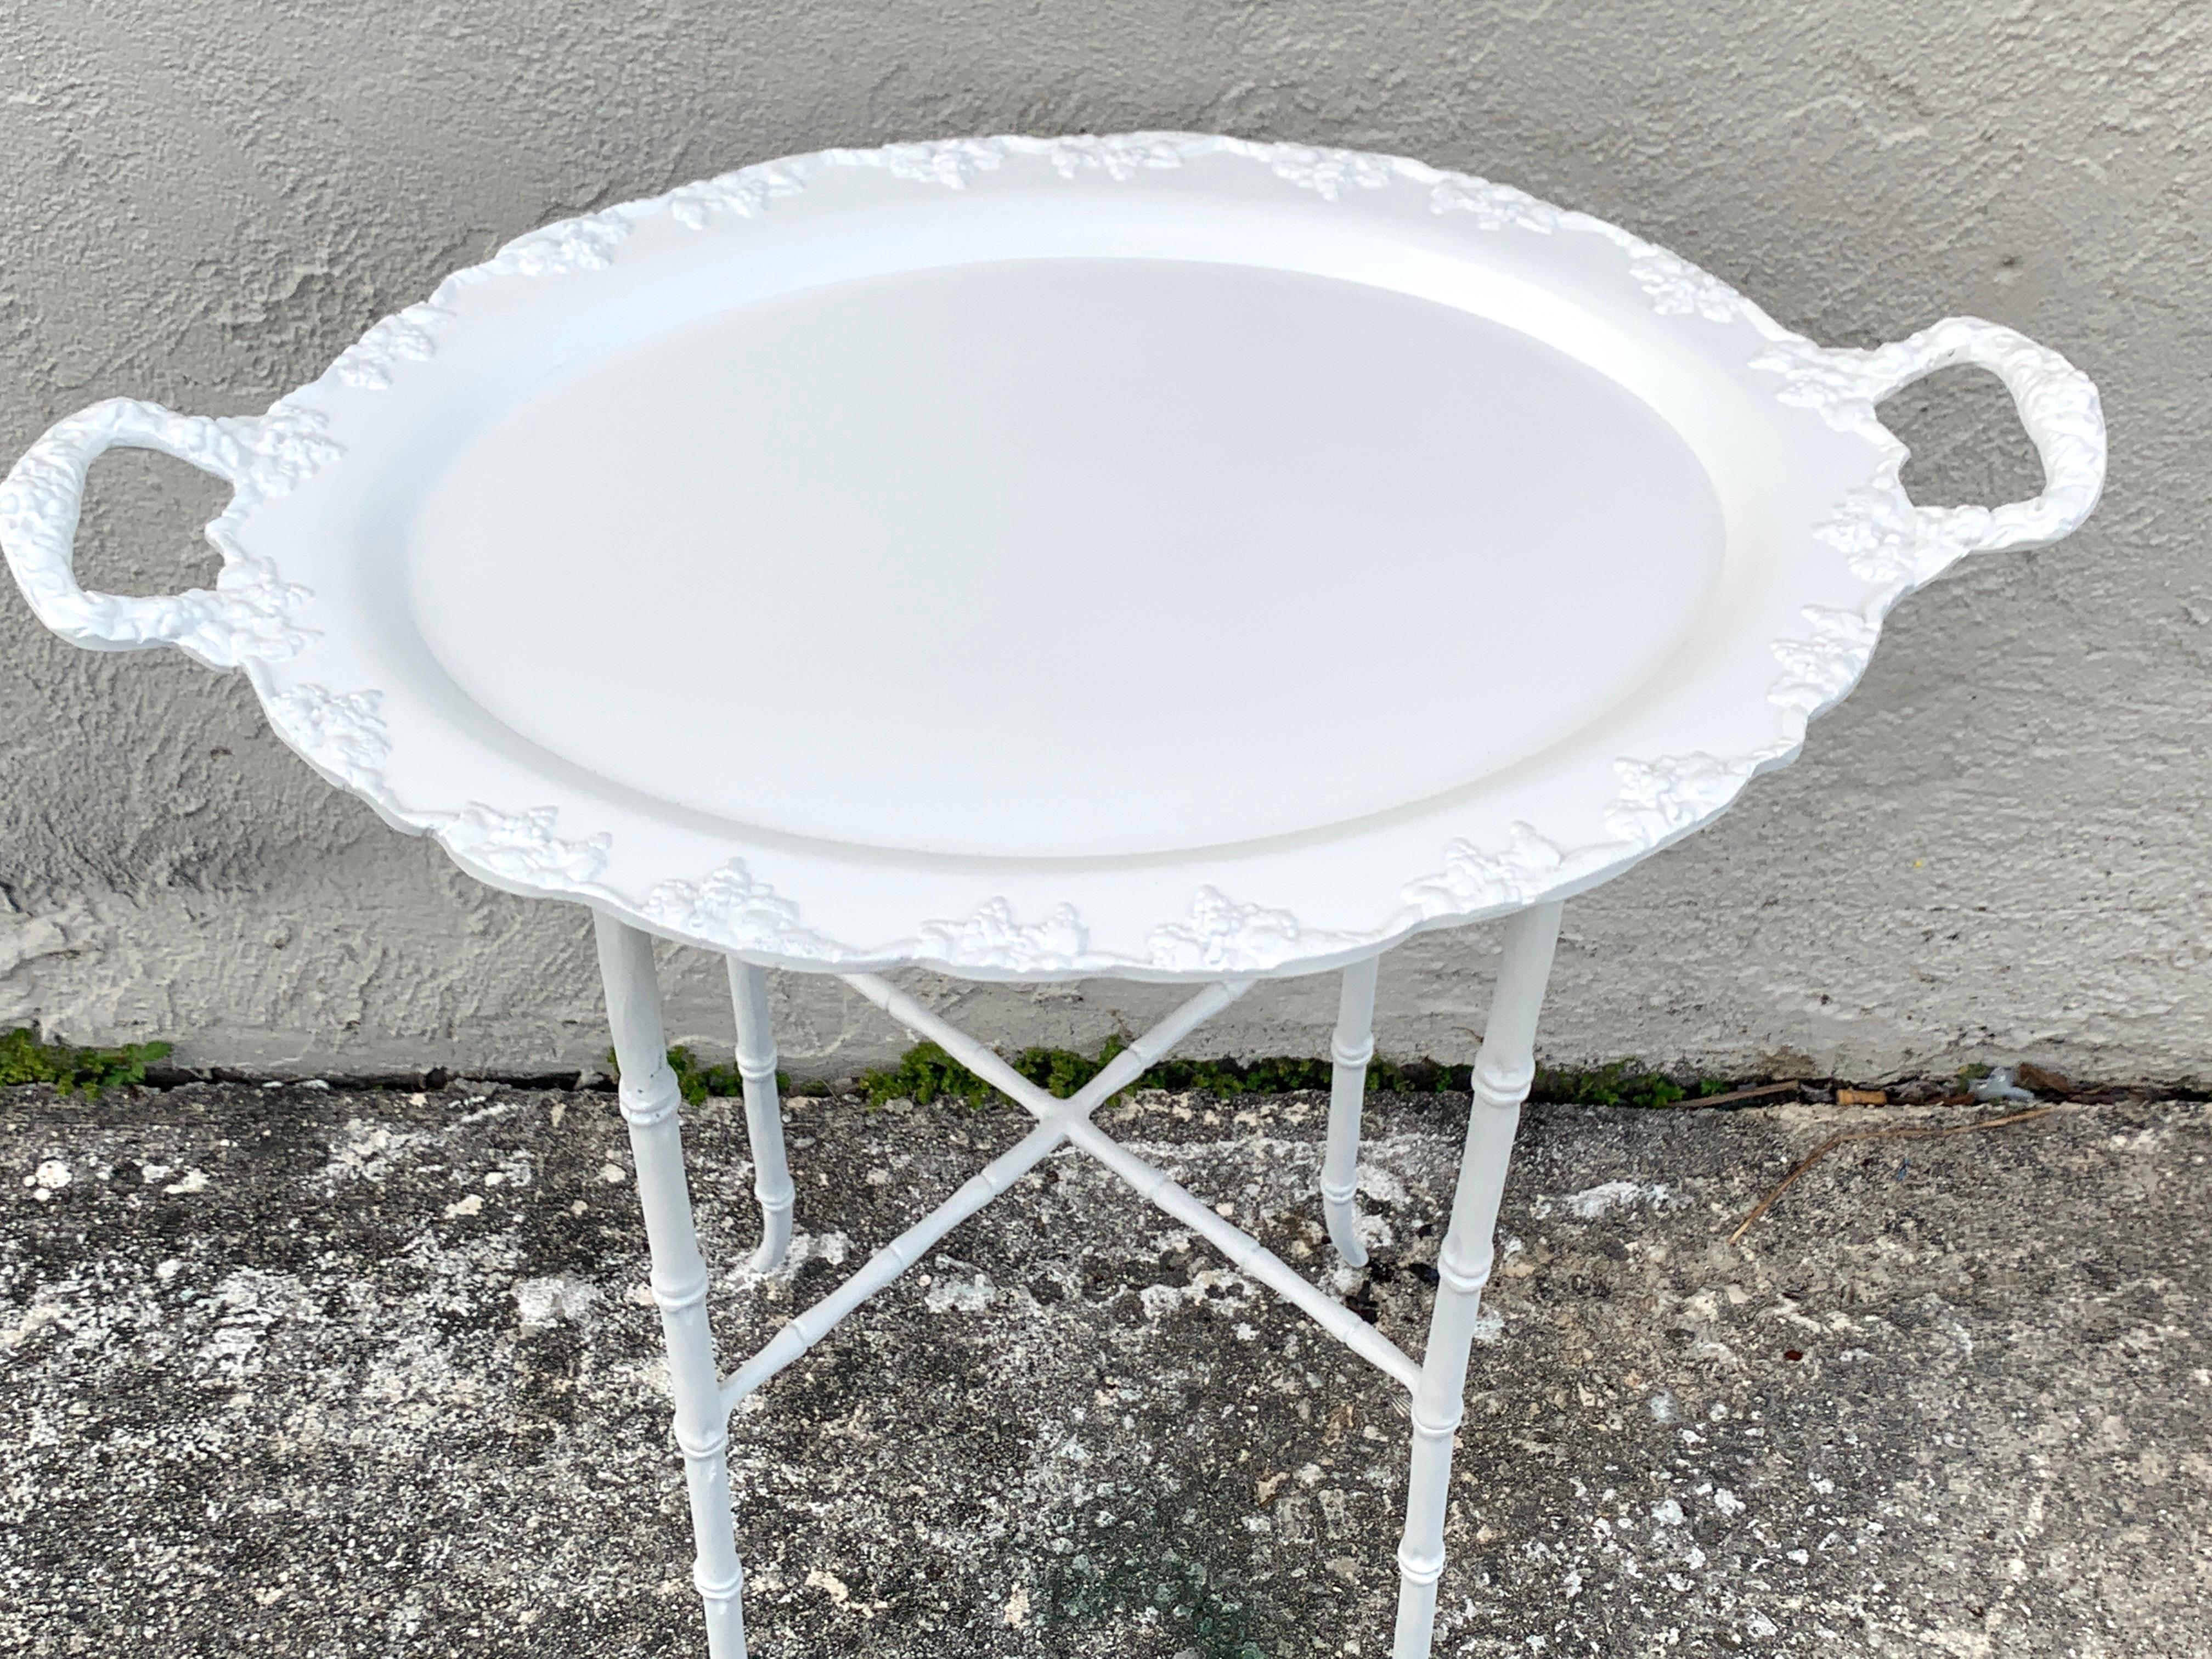 20th Century Faux Bamboo and Grape Motif White Enameled Tray Table, Provenance Celine Dion